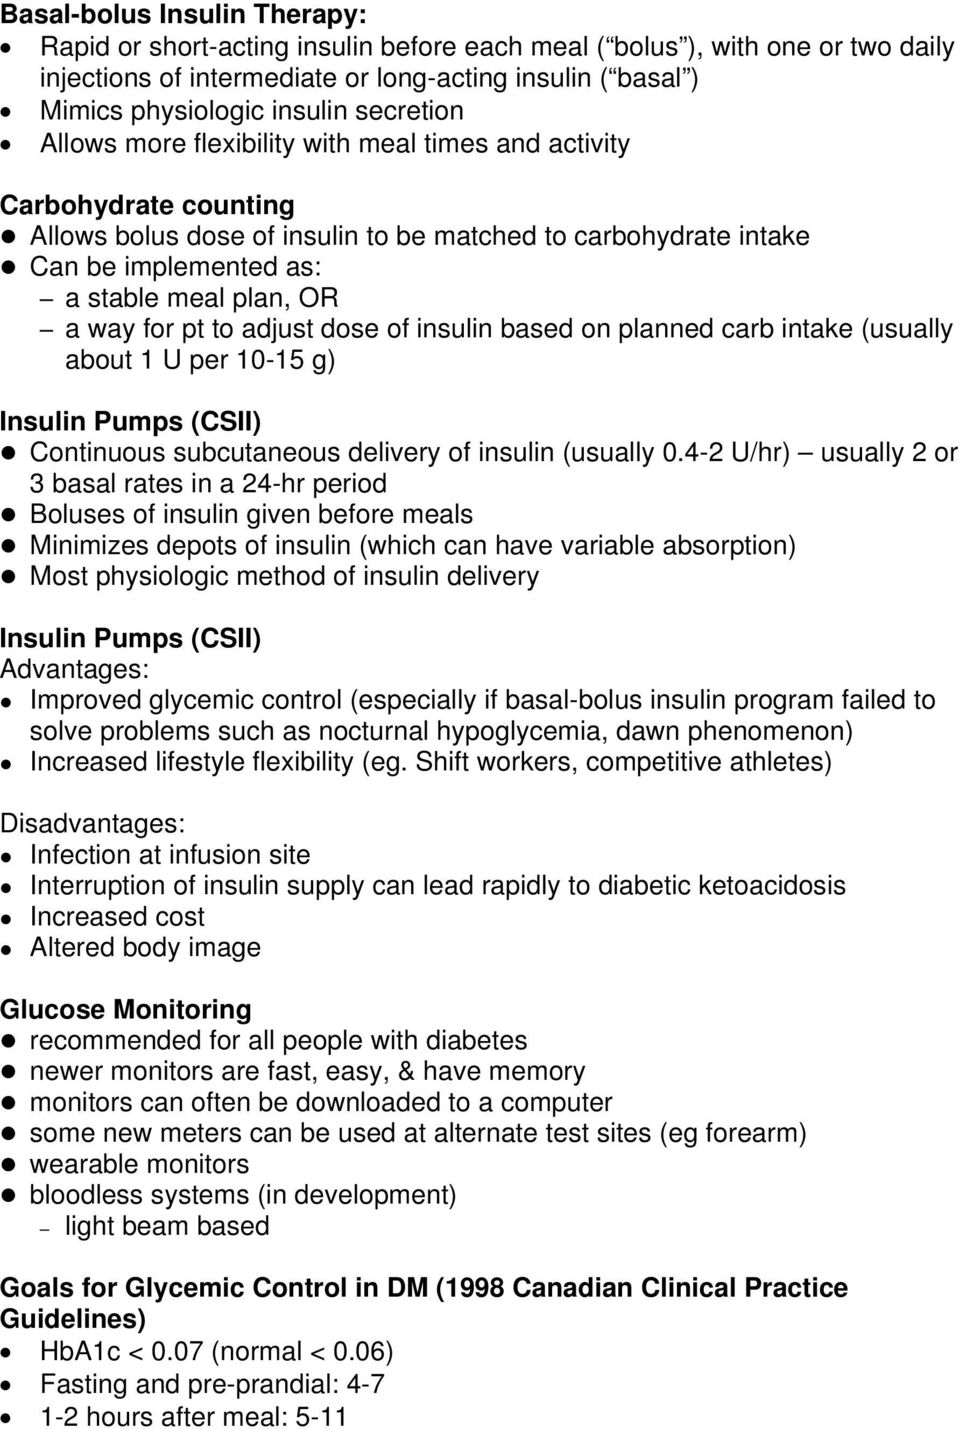 way for pt to adjust dose of insulin based on planned carb intake (usually about 1 U per 10-15 g) Insulin Pumps (CSII) Continuous subcutaneous delivery of insulin (usually 0.